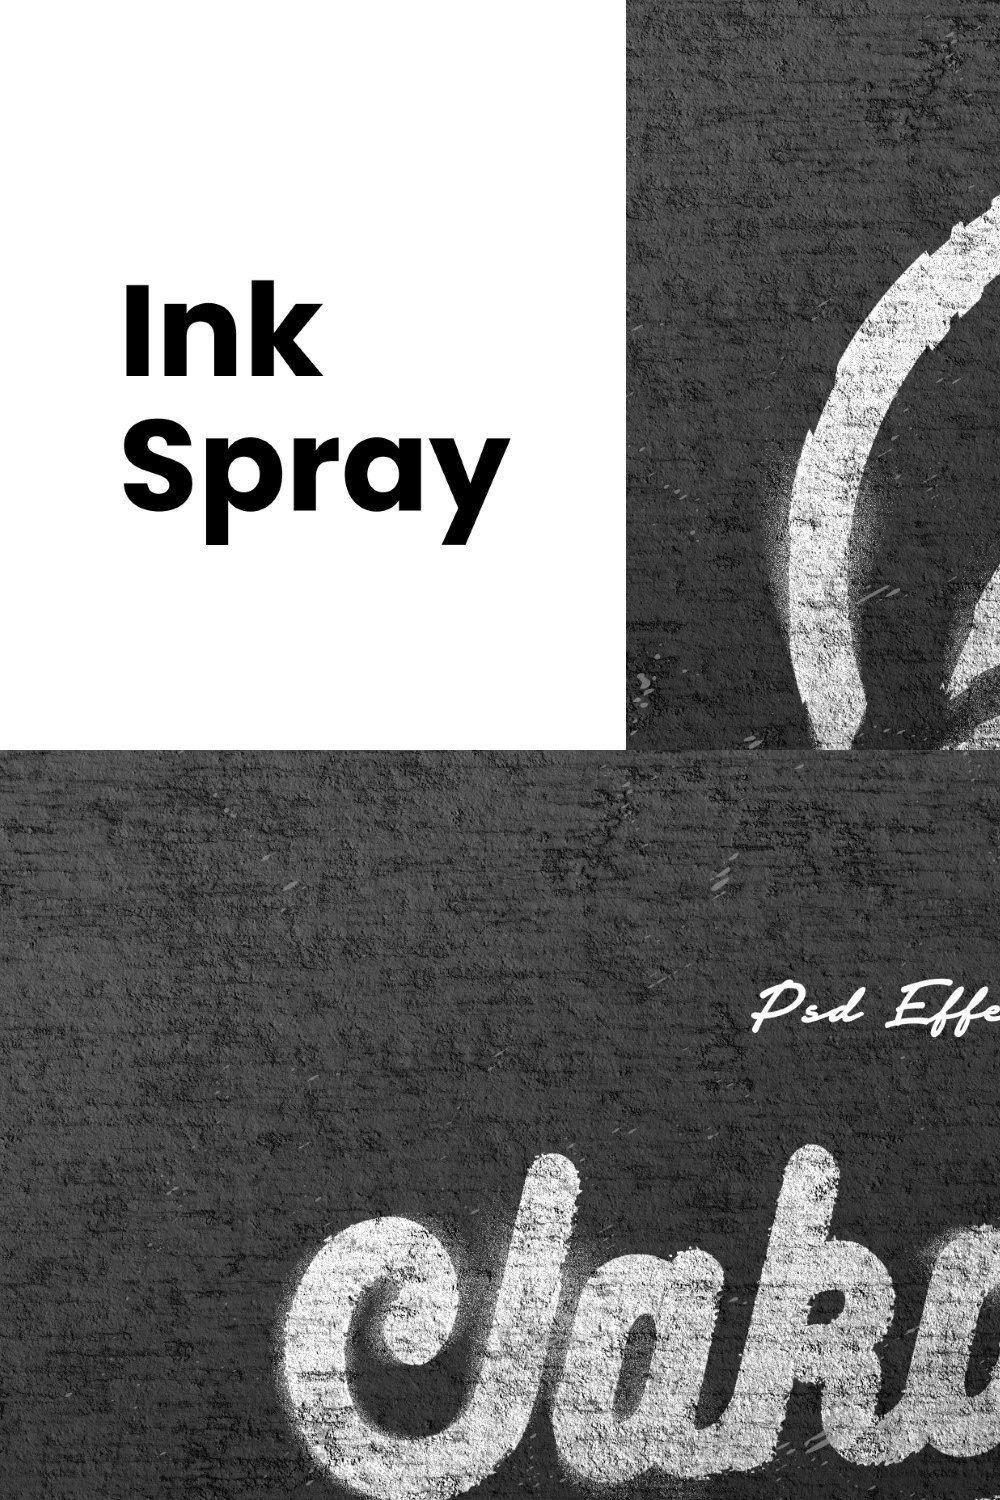 Ink spray Psd effect pinterest preview image.